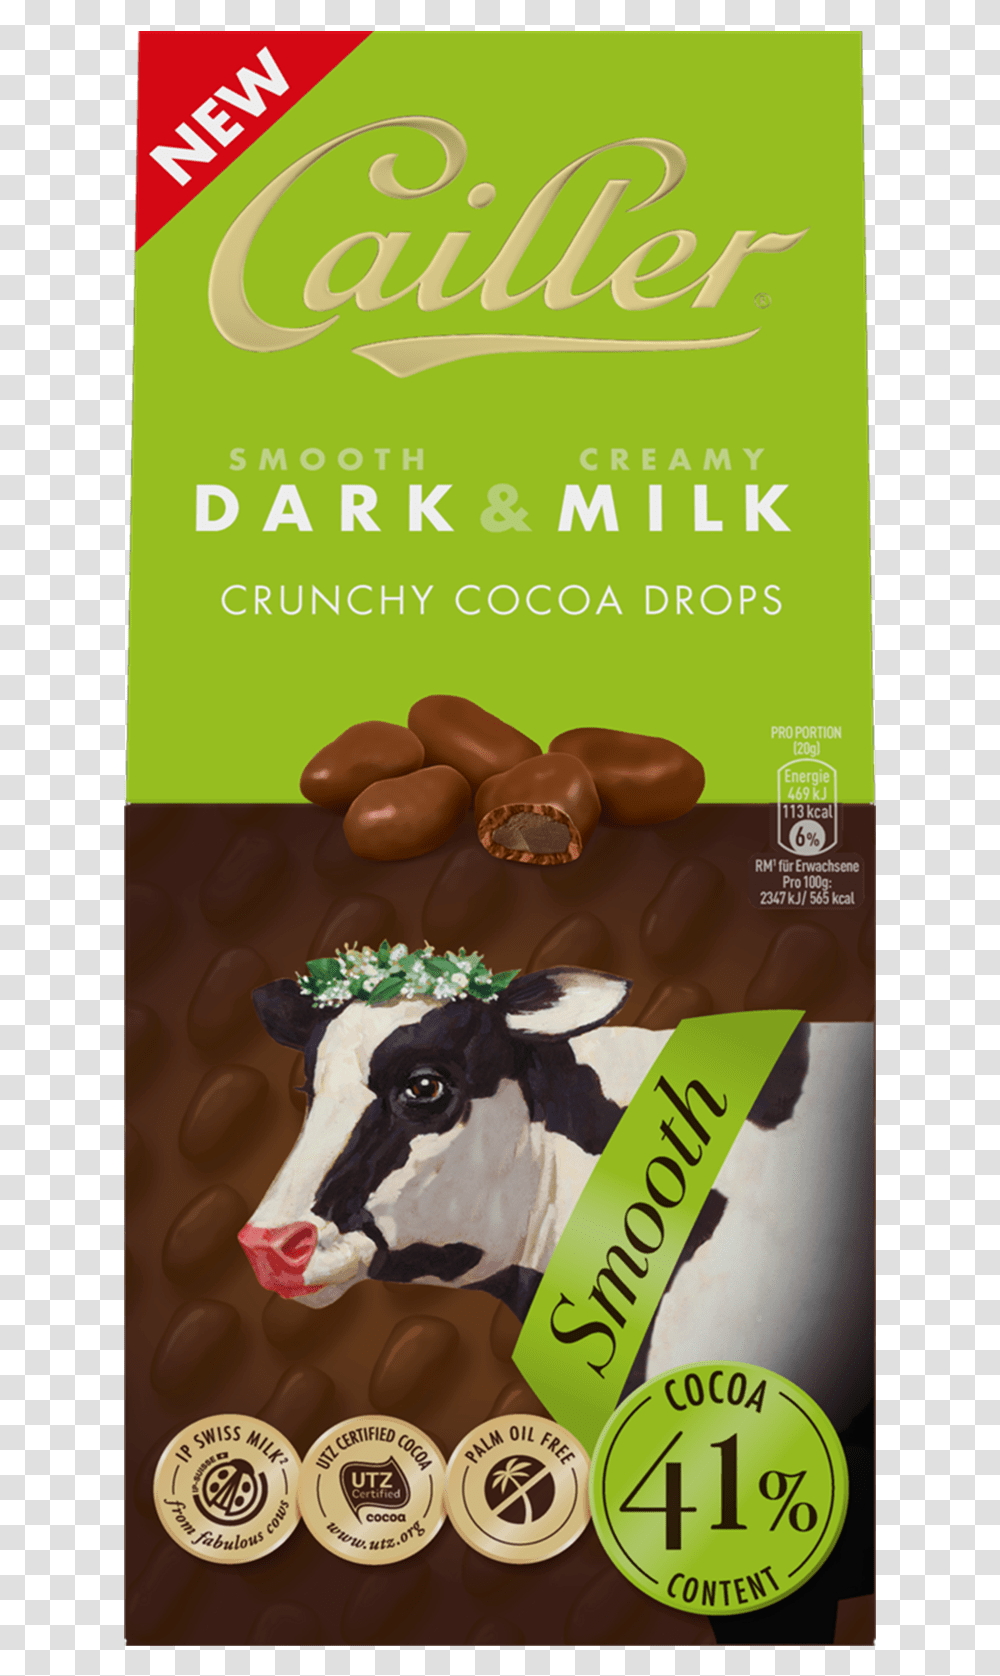 Darkampmilk Crunchy Cocoa Drops 41 Smooth Cacao 80g Cailler Dark And Milk, Cow, Mammal, Animal, Poster Transparent Png